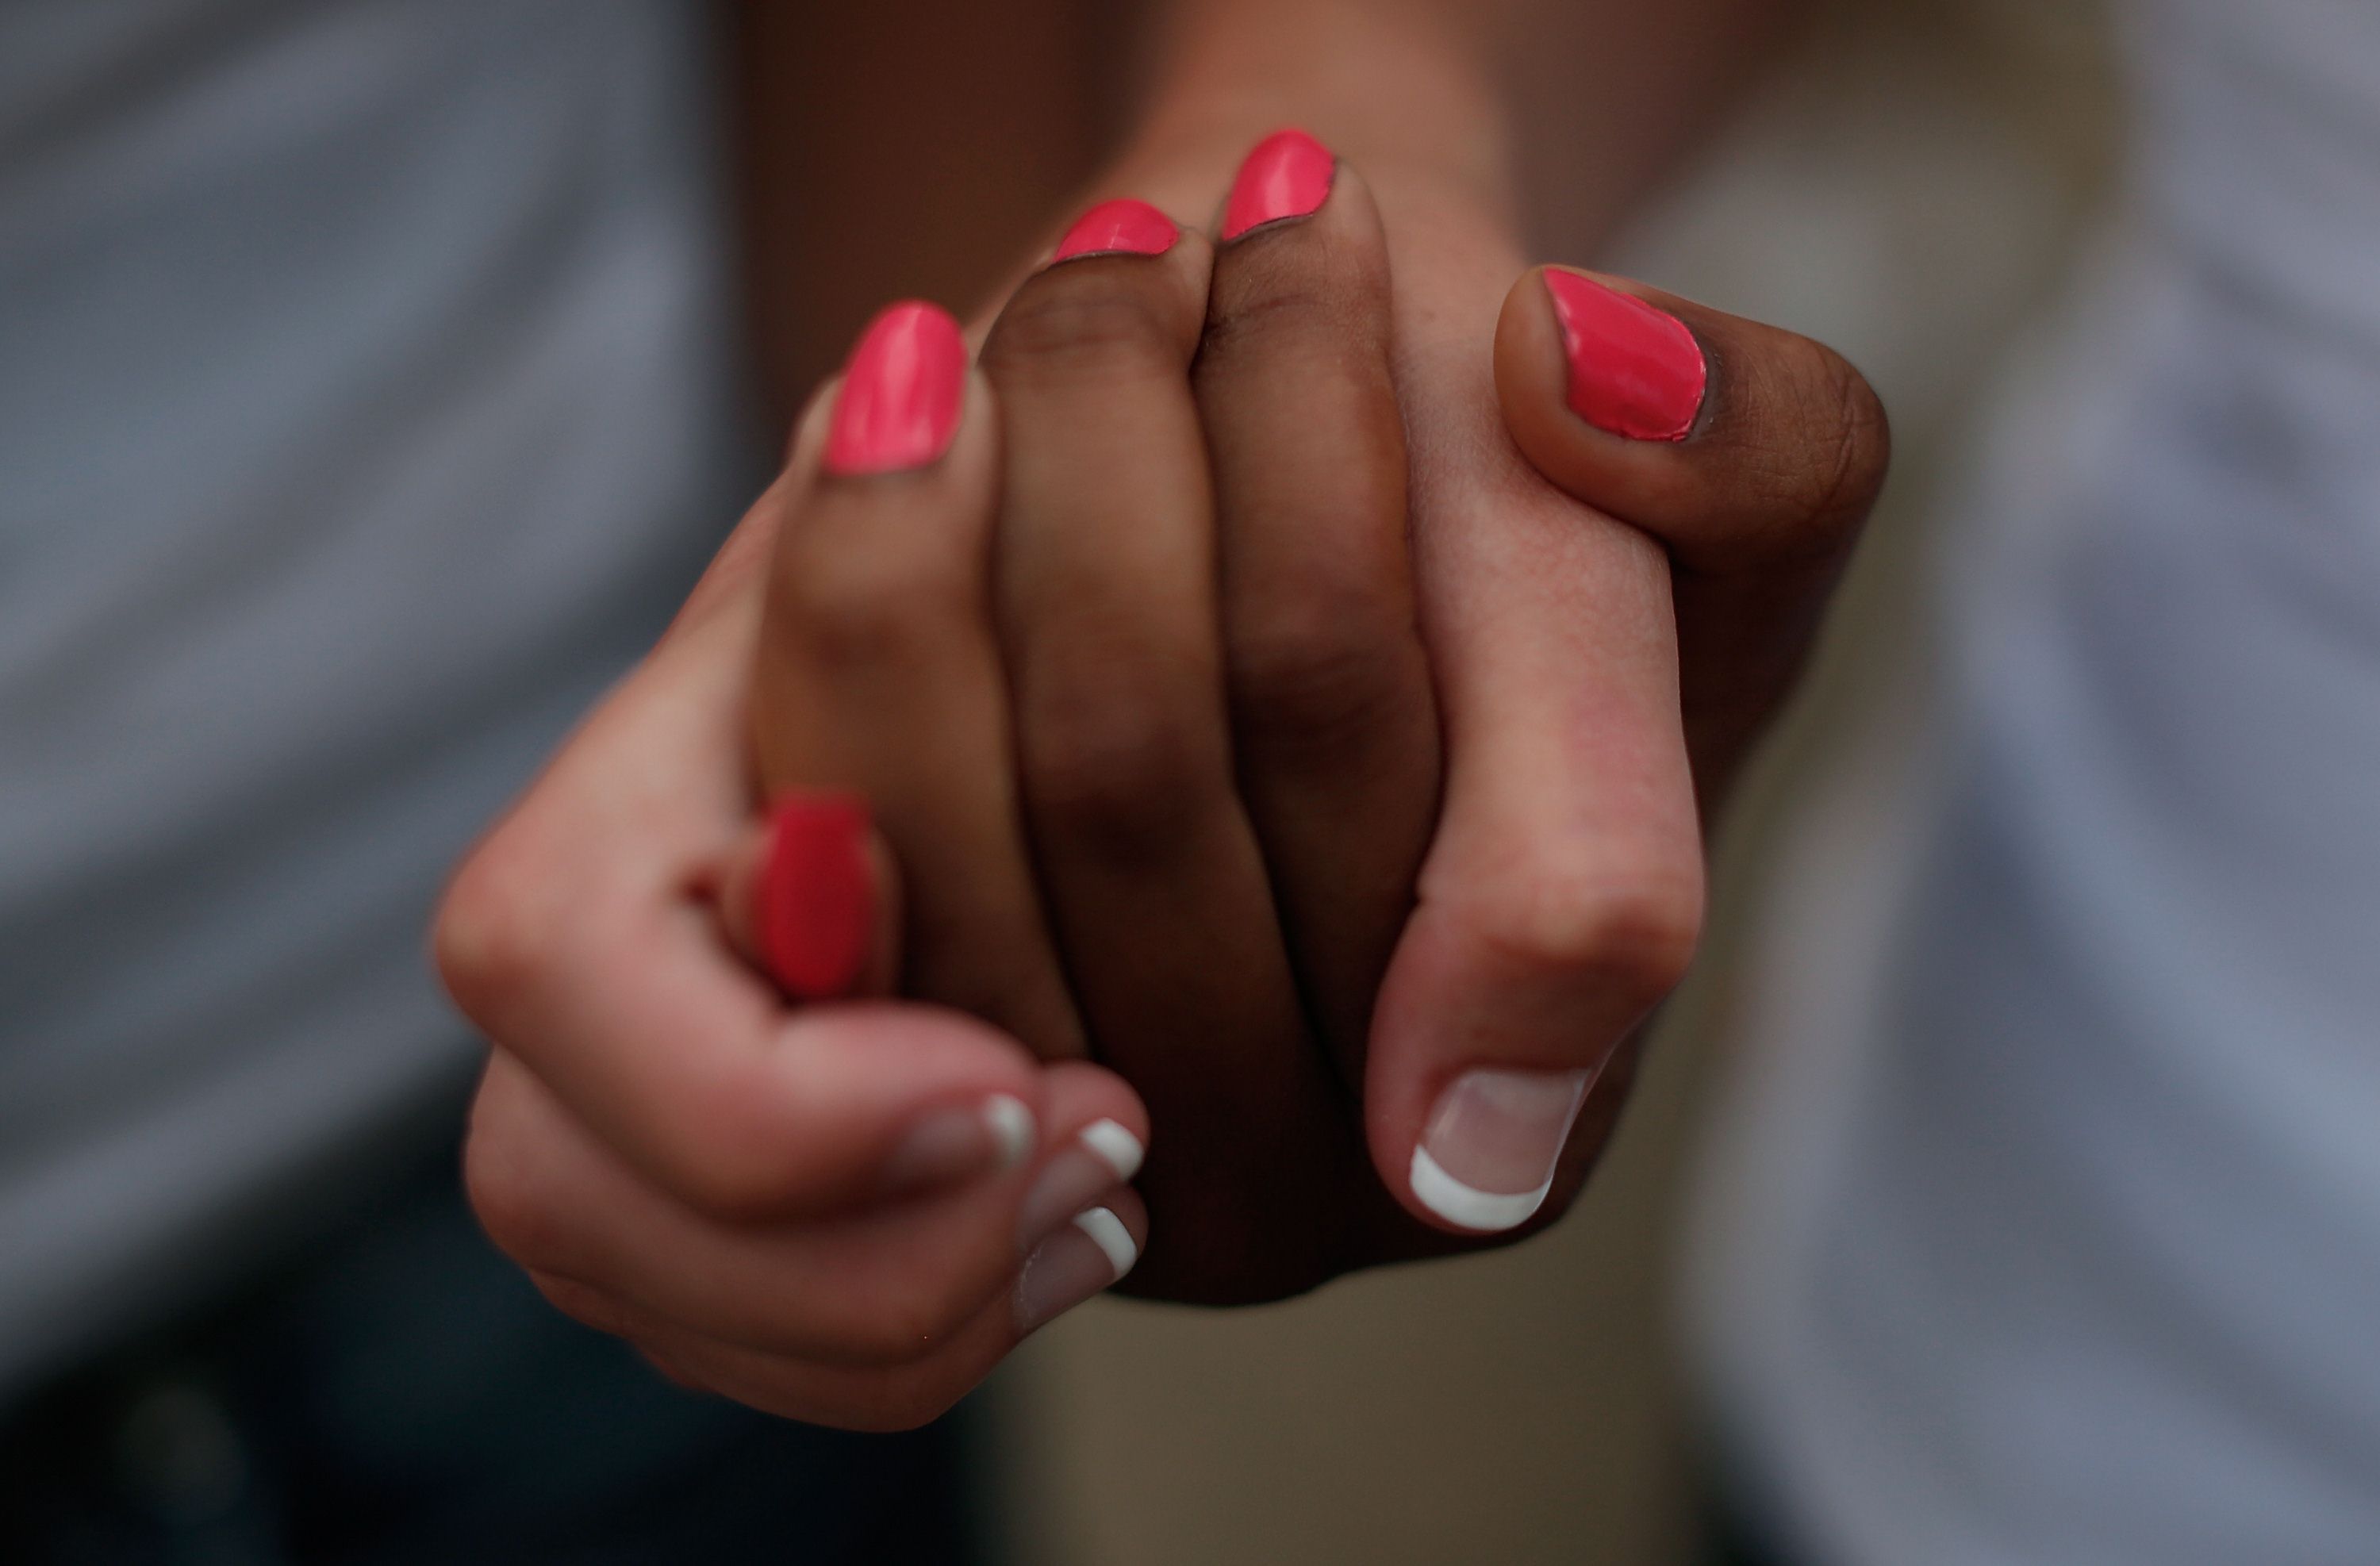 Students from the University of South Carolina and South Carolina State University link hands during a moment of silence for the victims of the church killings. Photo: AFP